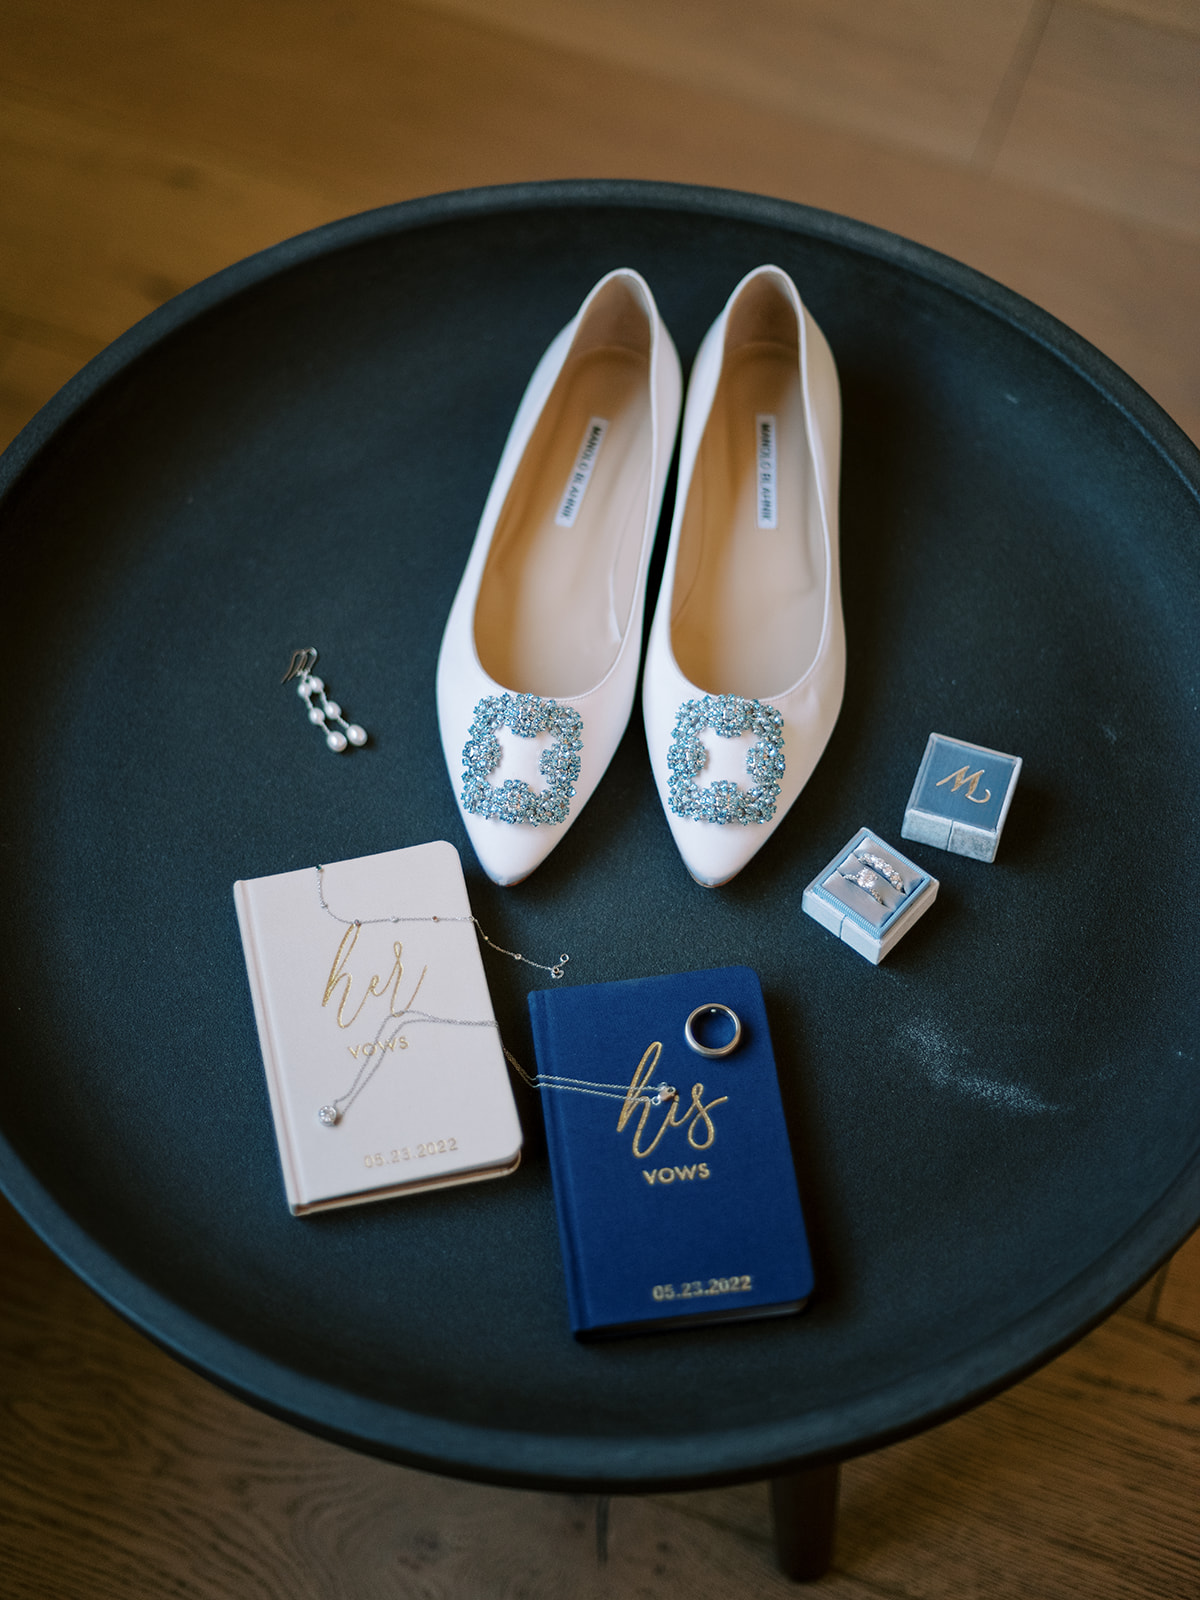 Details from a bride who got married in Zion National Park, Manolo Blahnik shoes with vow books and rings.